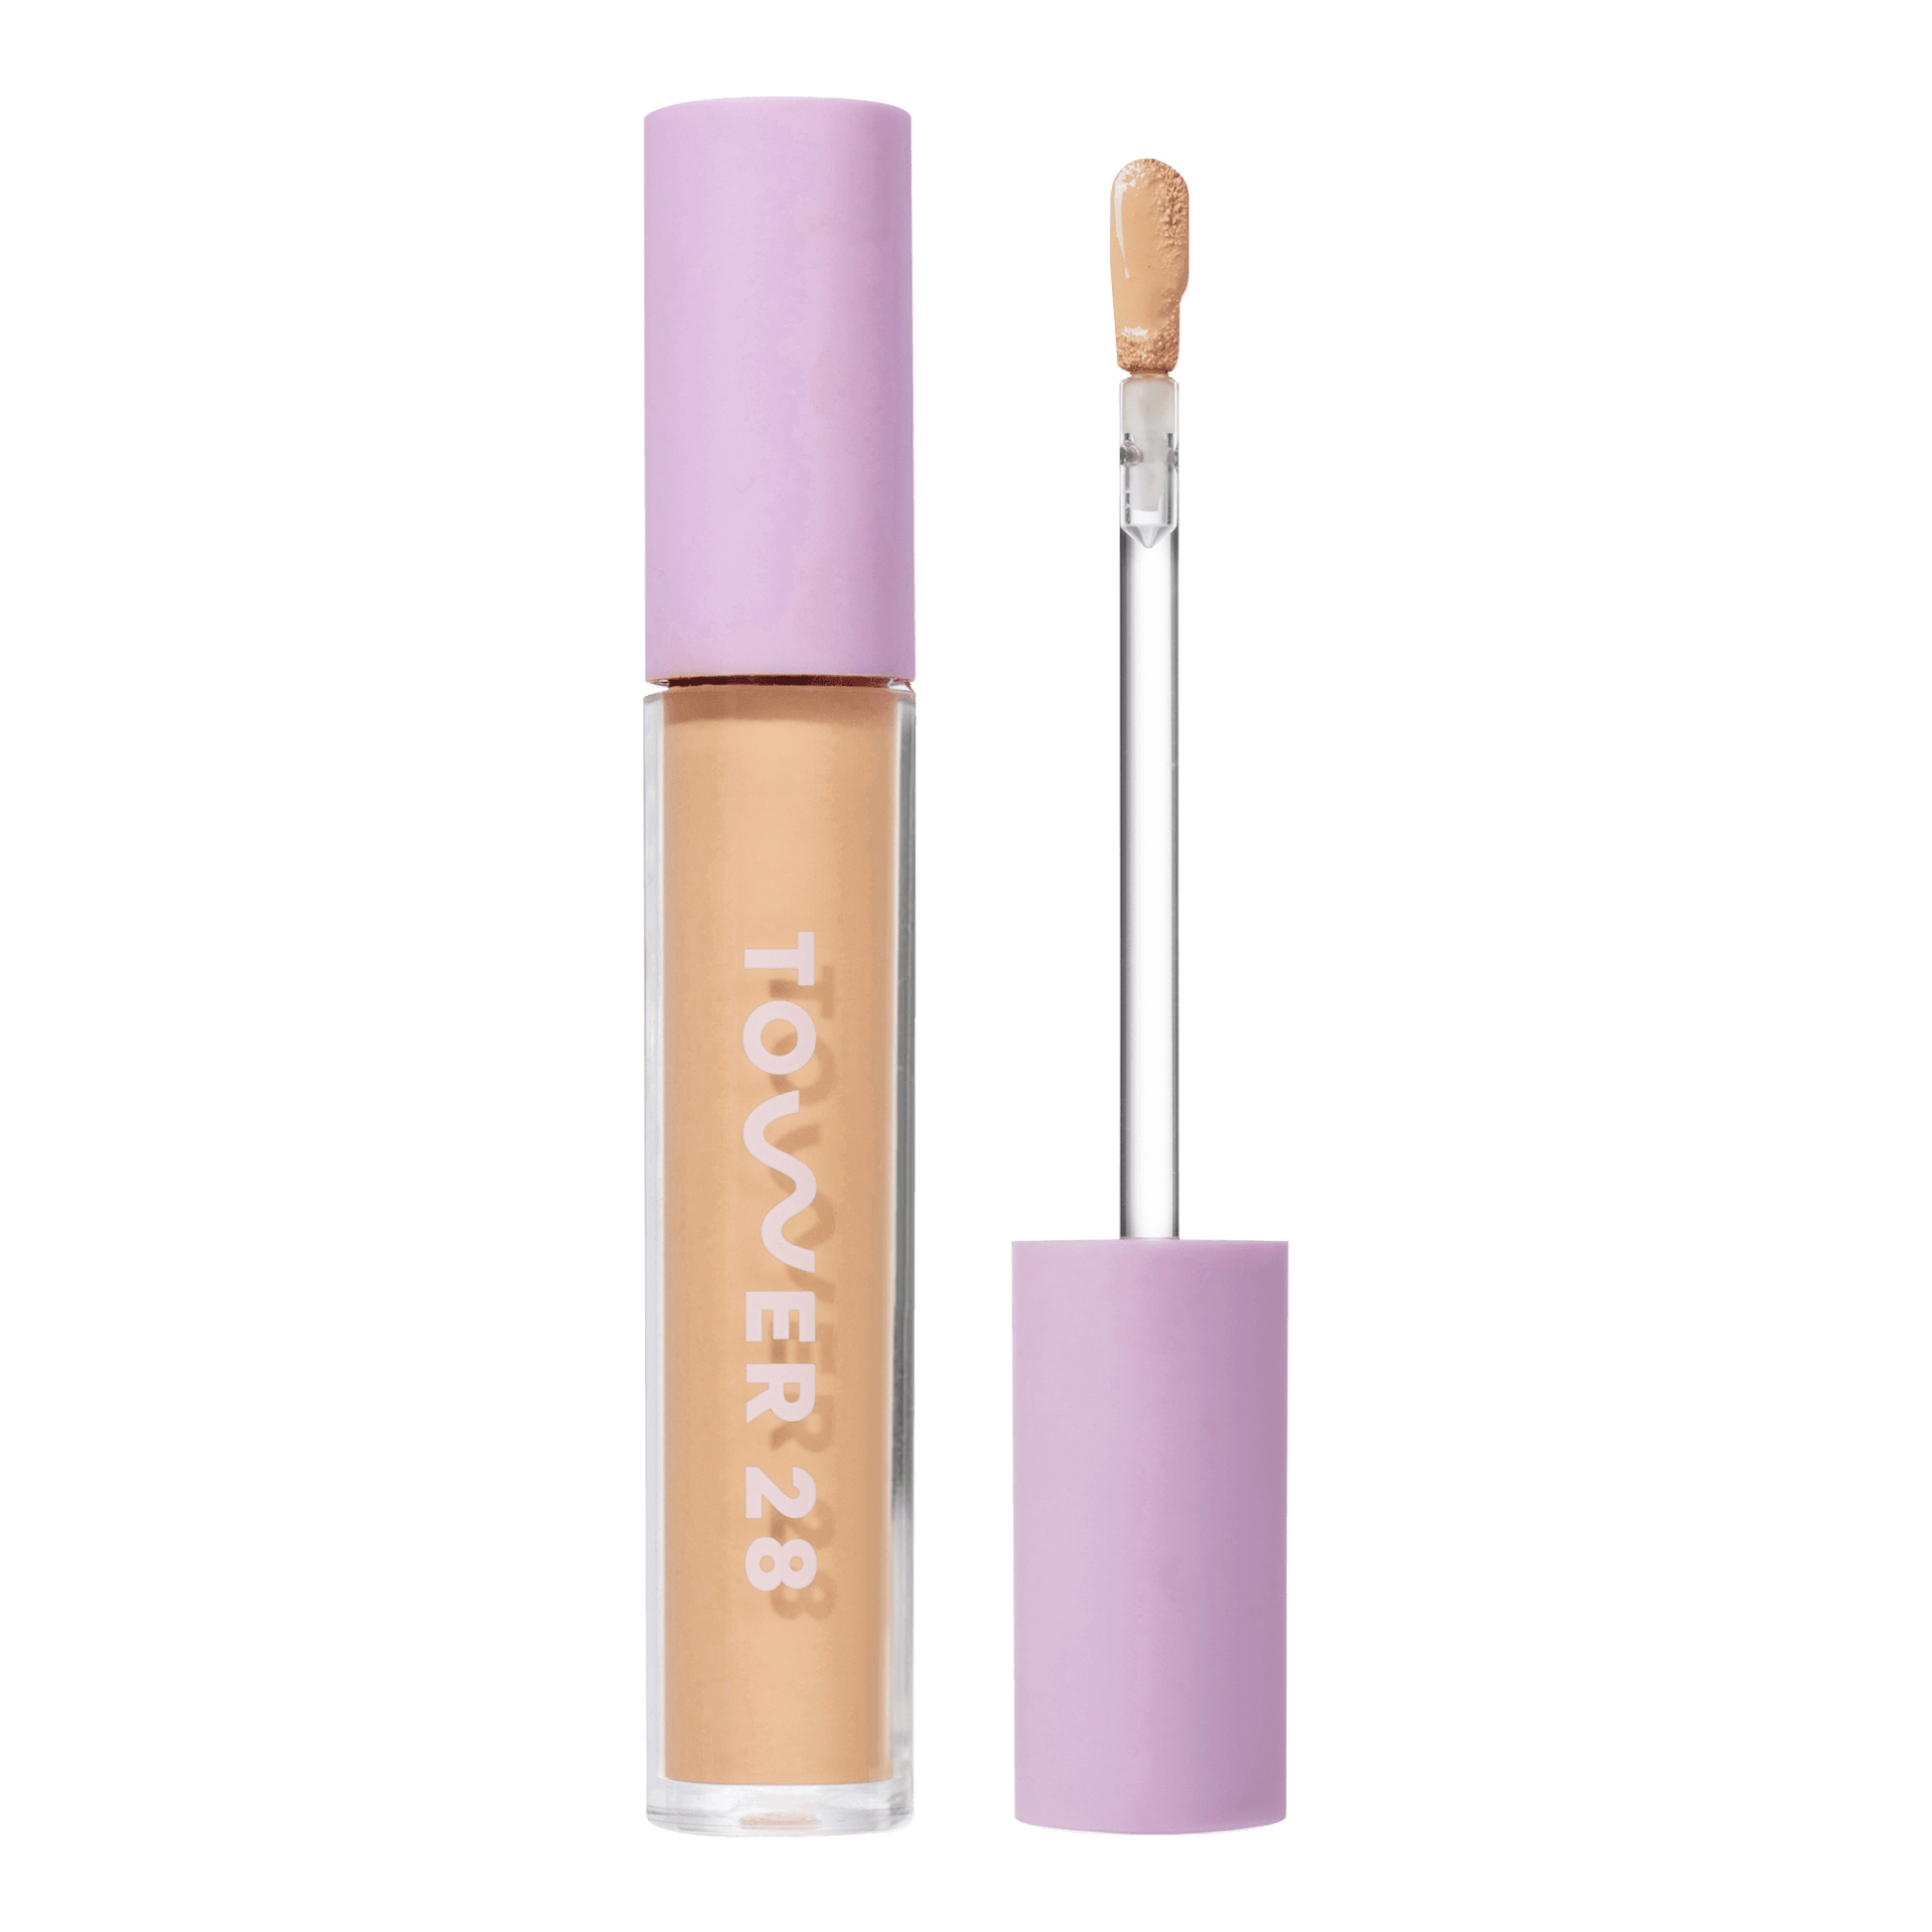 Tower 28 Beauty Swipe Serum Concealer in the shade 9.0 MDR